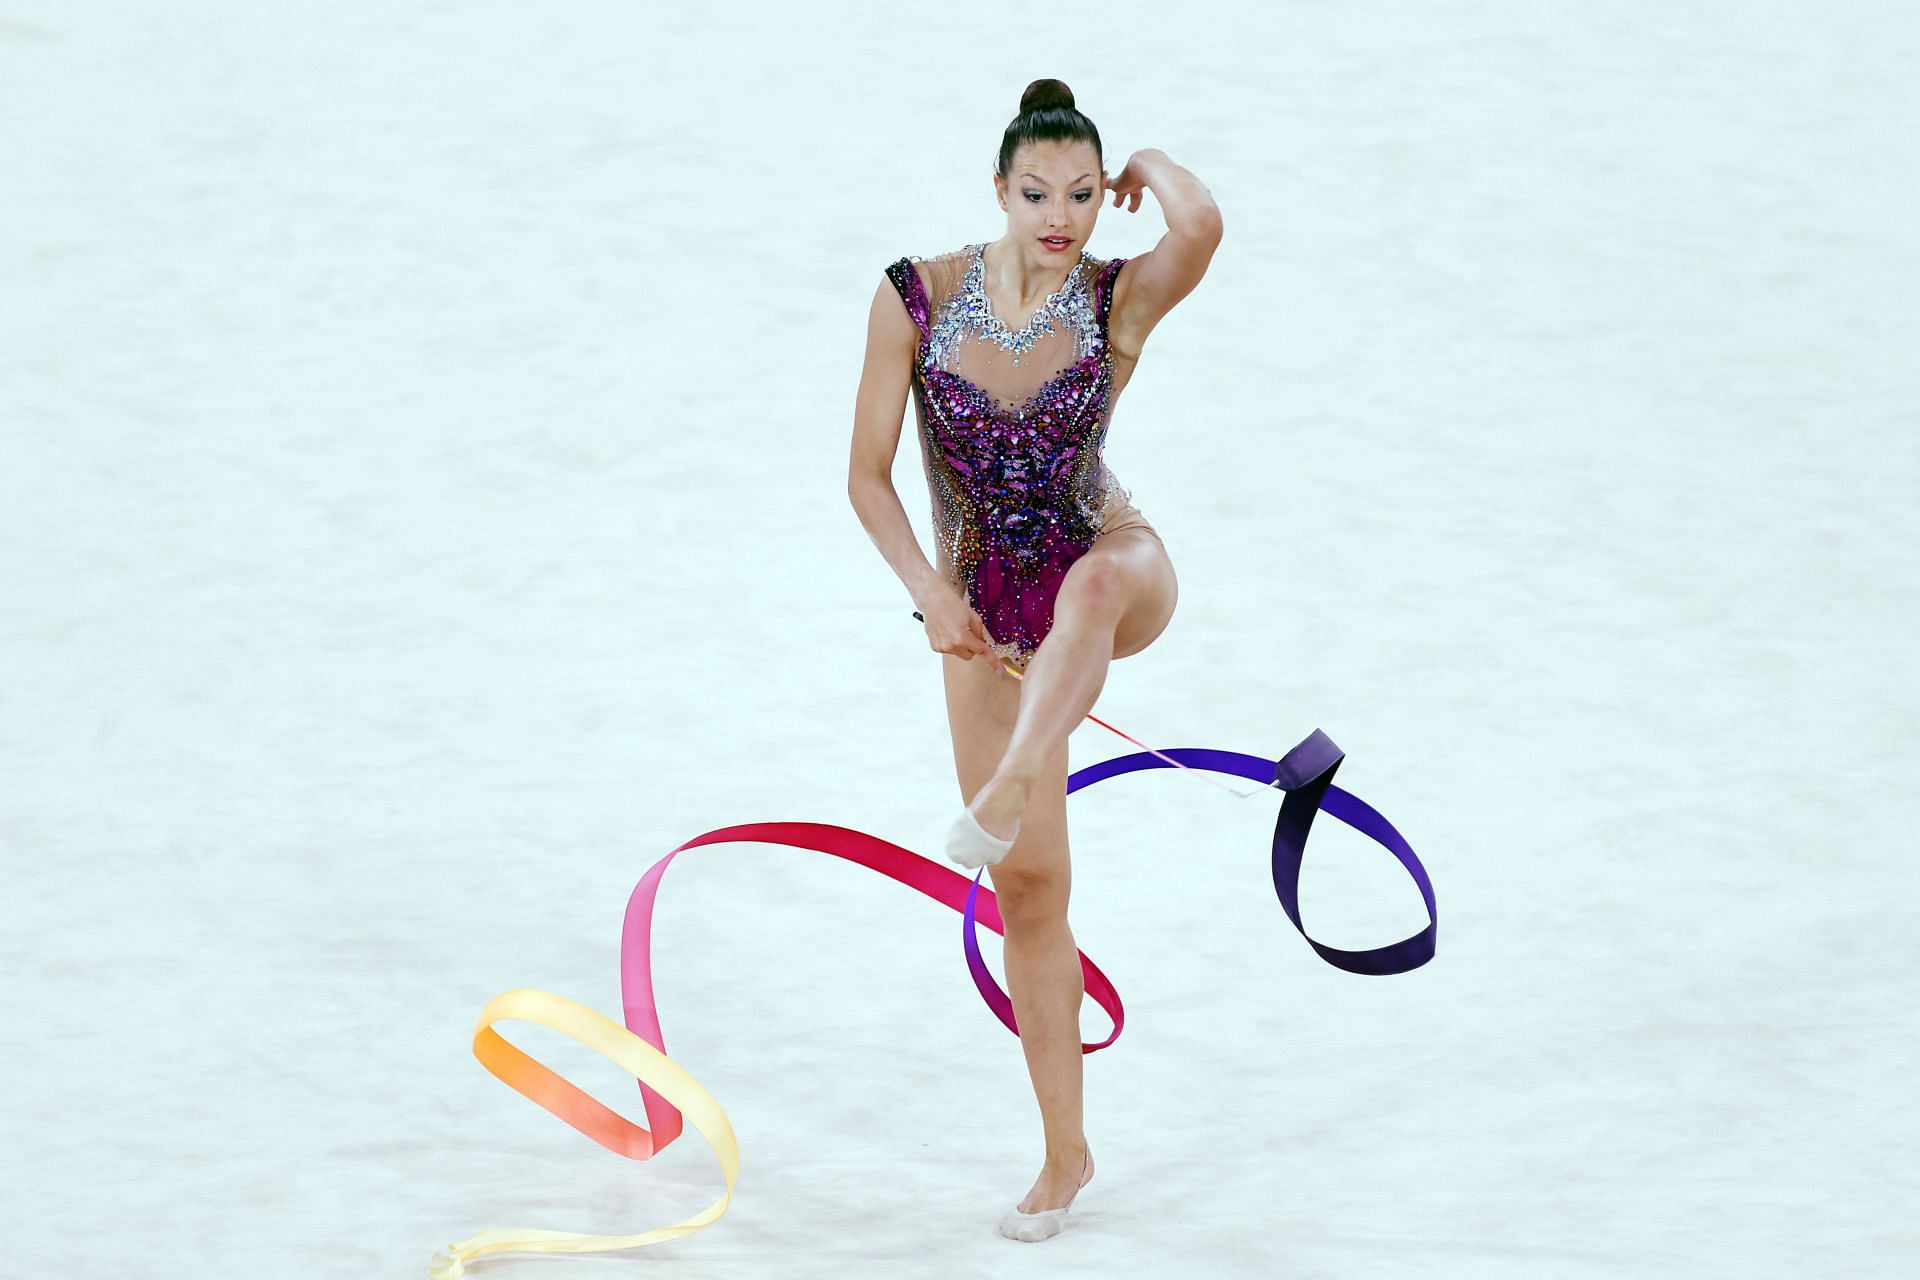 Rhythmic Gymnastics dazzles audience with grace and athleticism